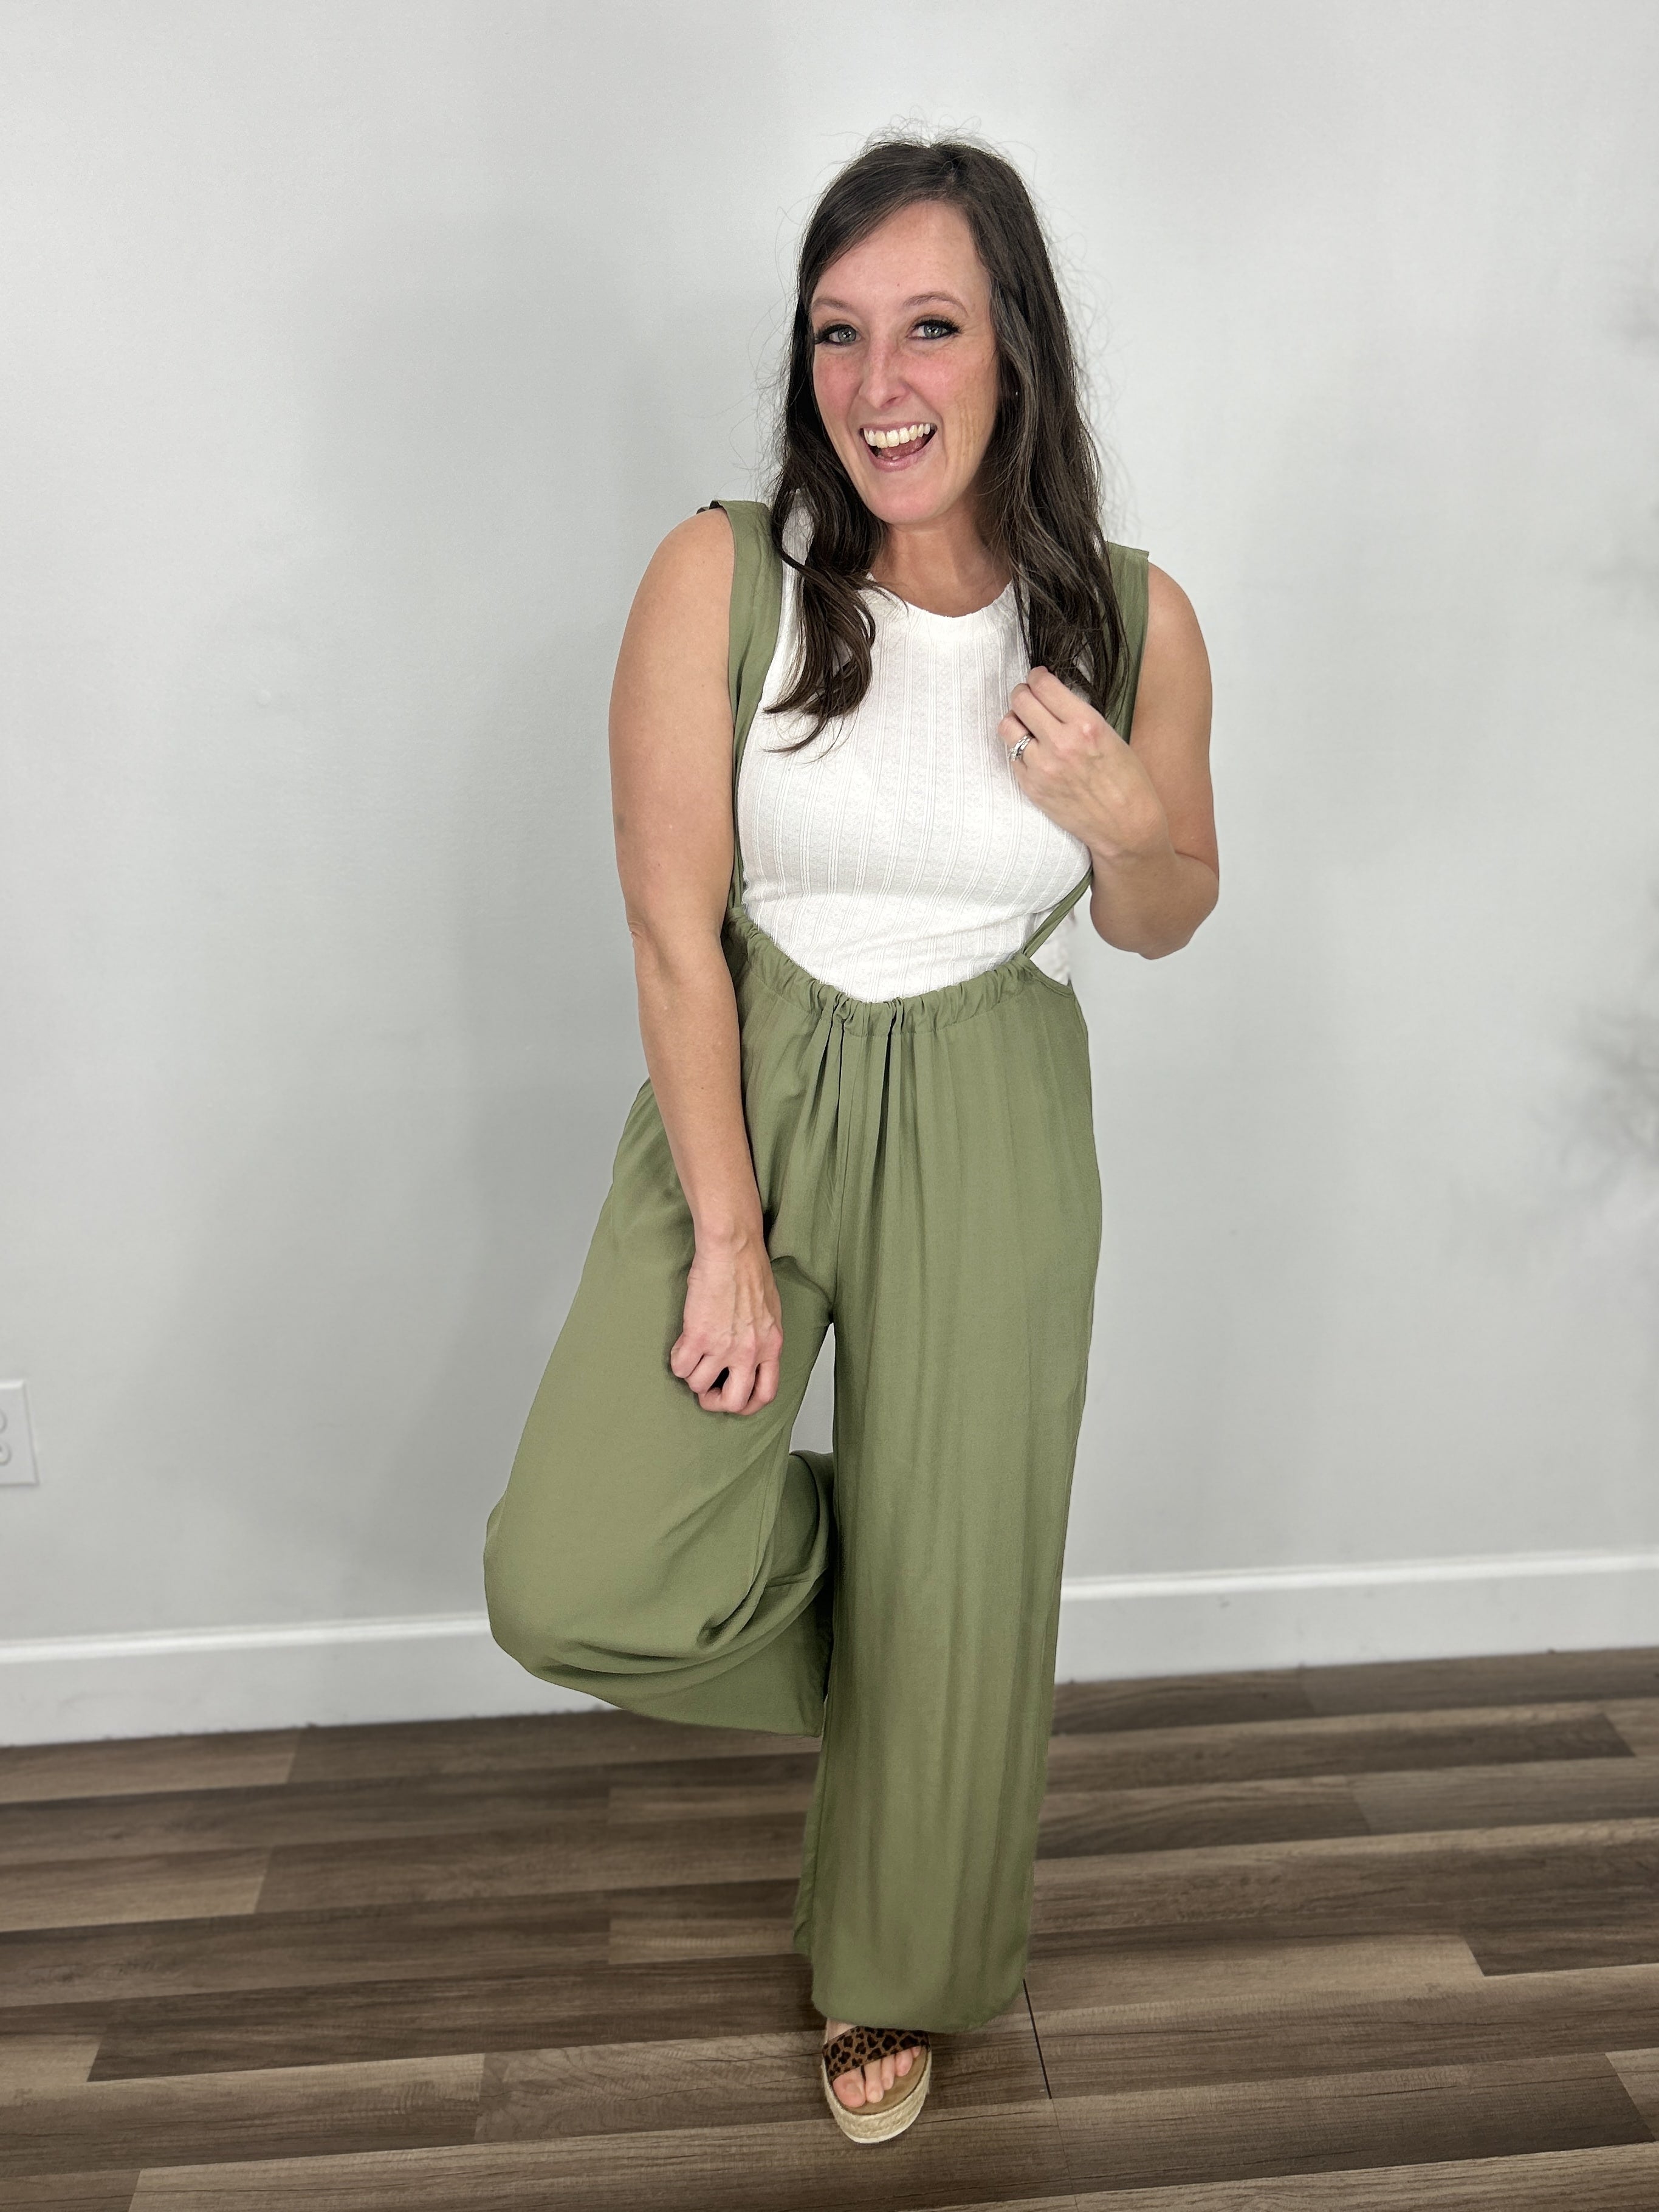 Casual Wide Leg Pants for Spring - Sunshine Style